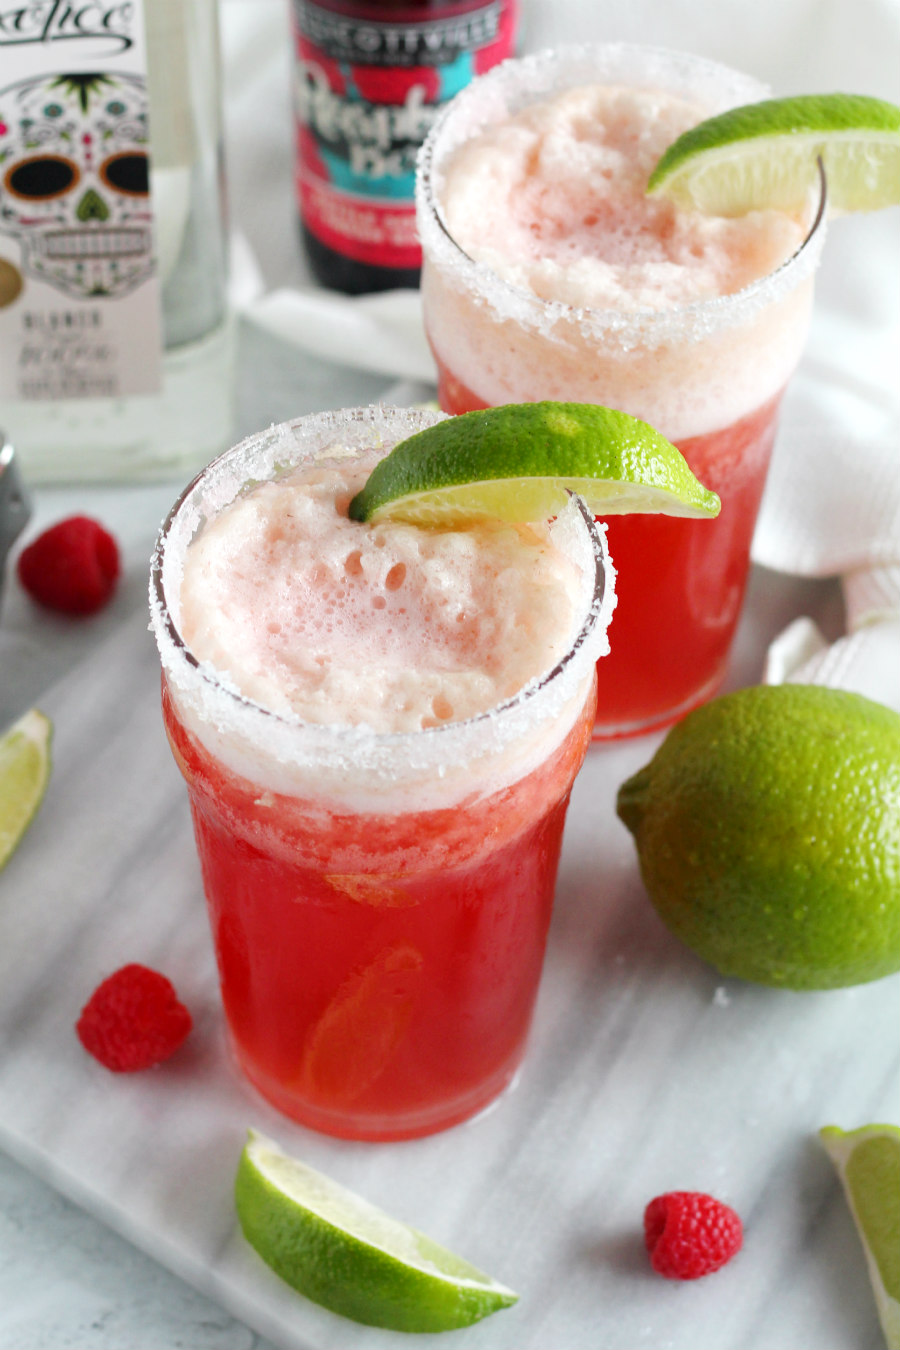 This Raspberry Beergarita Recipe is made with raspberry flavored beer and classic margarita ingredients.  It's a fruity beer cocktail that combines two popular adult beverages into one delicious drink! Just blend 6 ingredients together for the perfect spring cocktail!